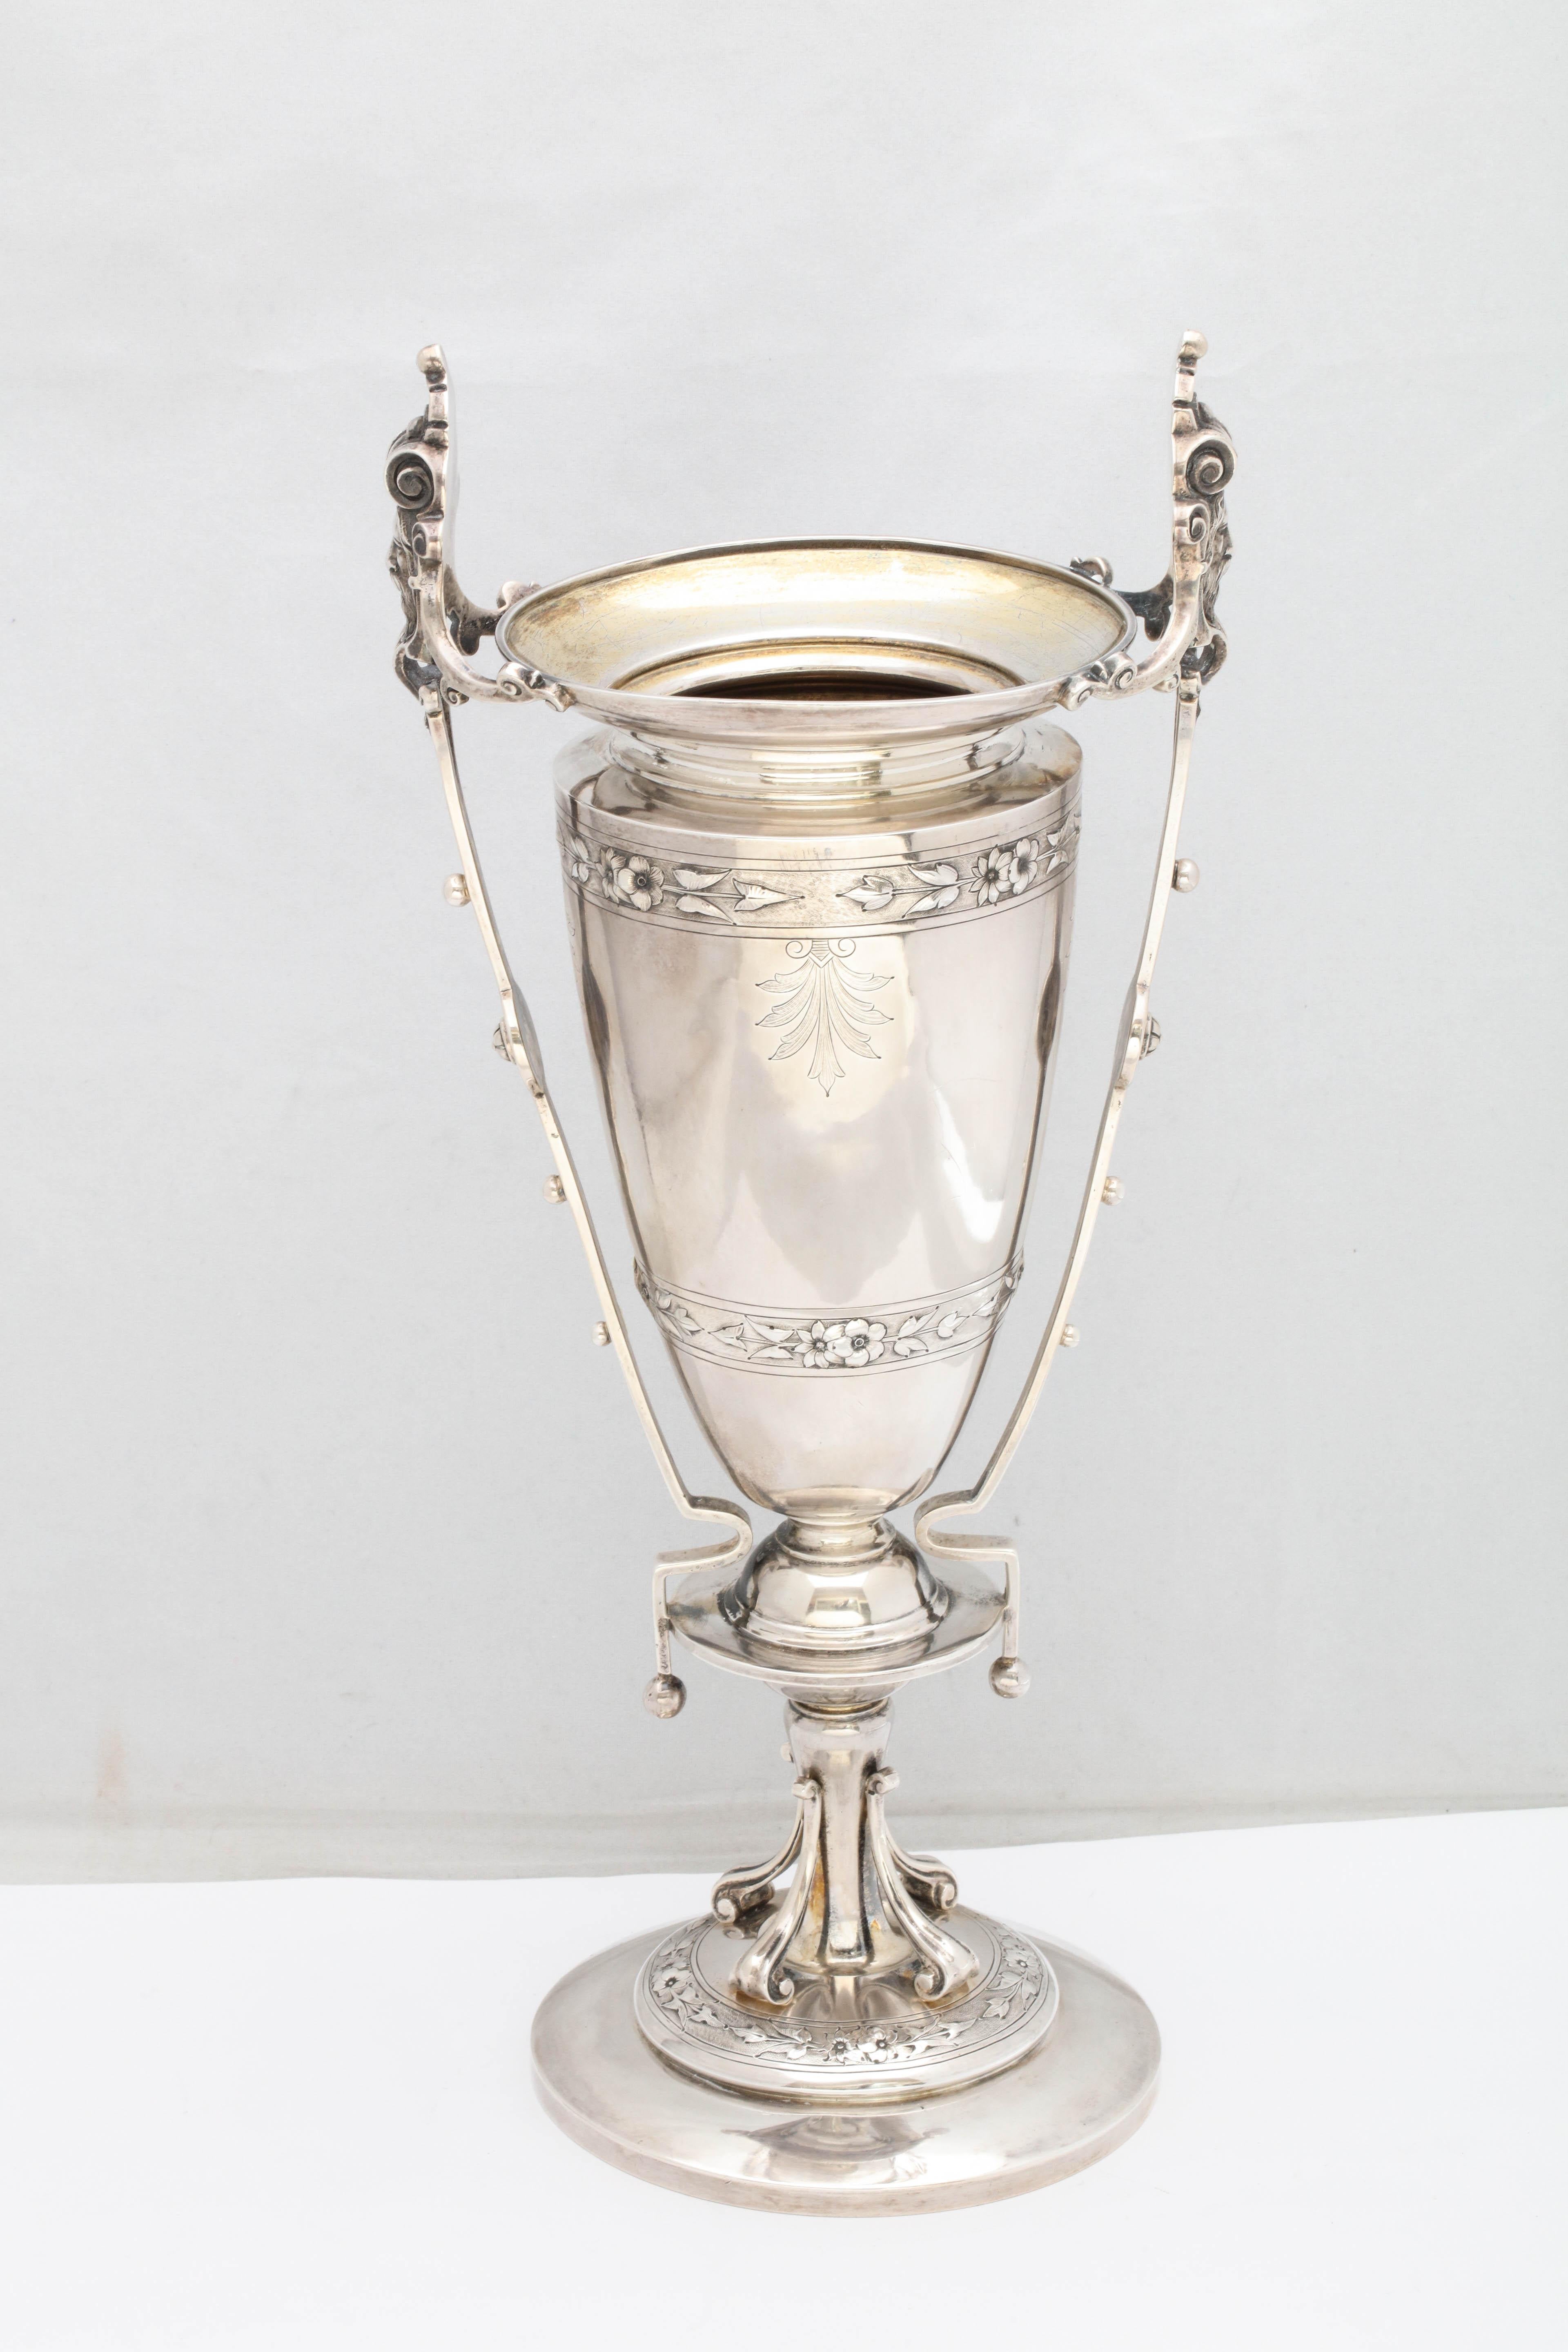 Gilt Neoclassical Sterling Silver Vase by Shreve, Stanwood and Co.